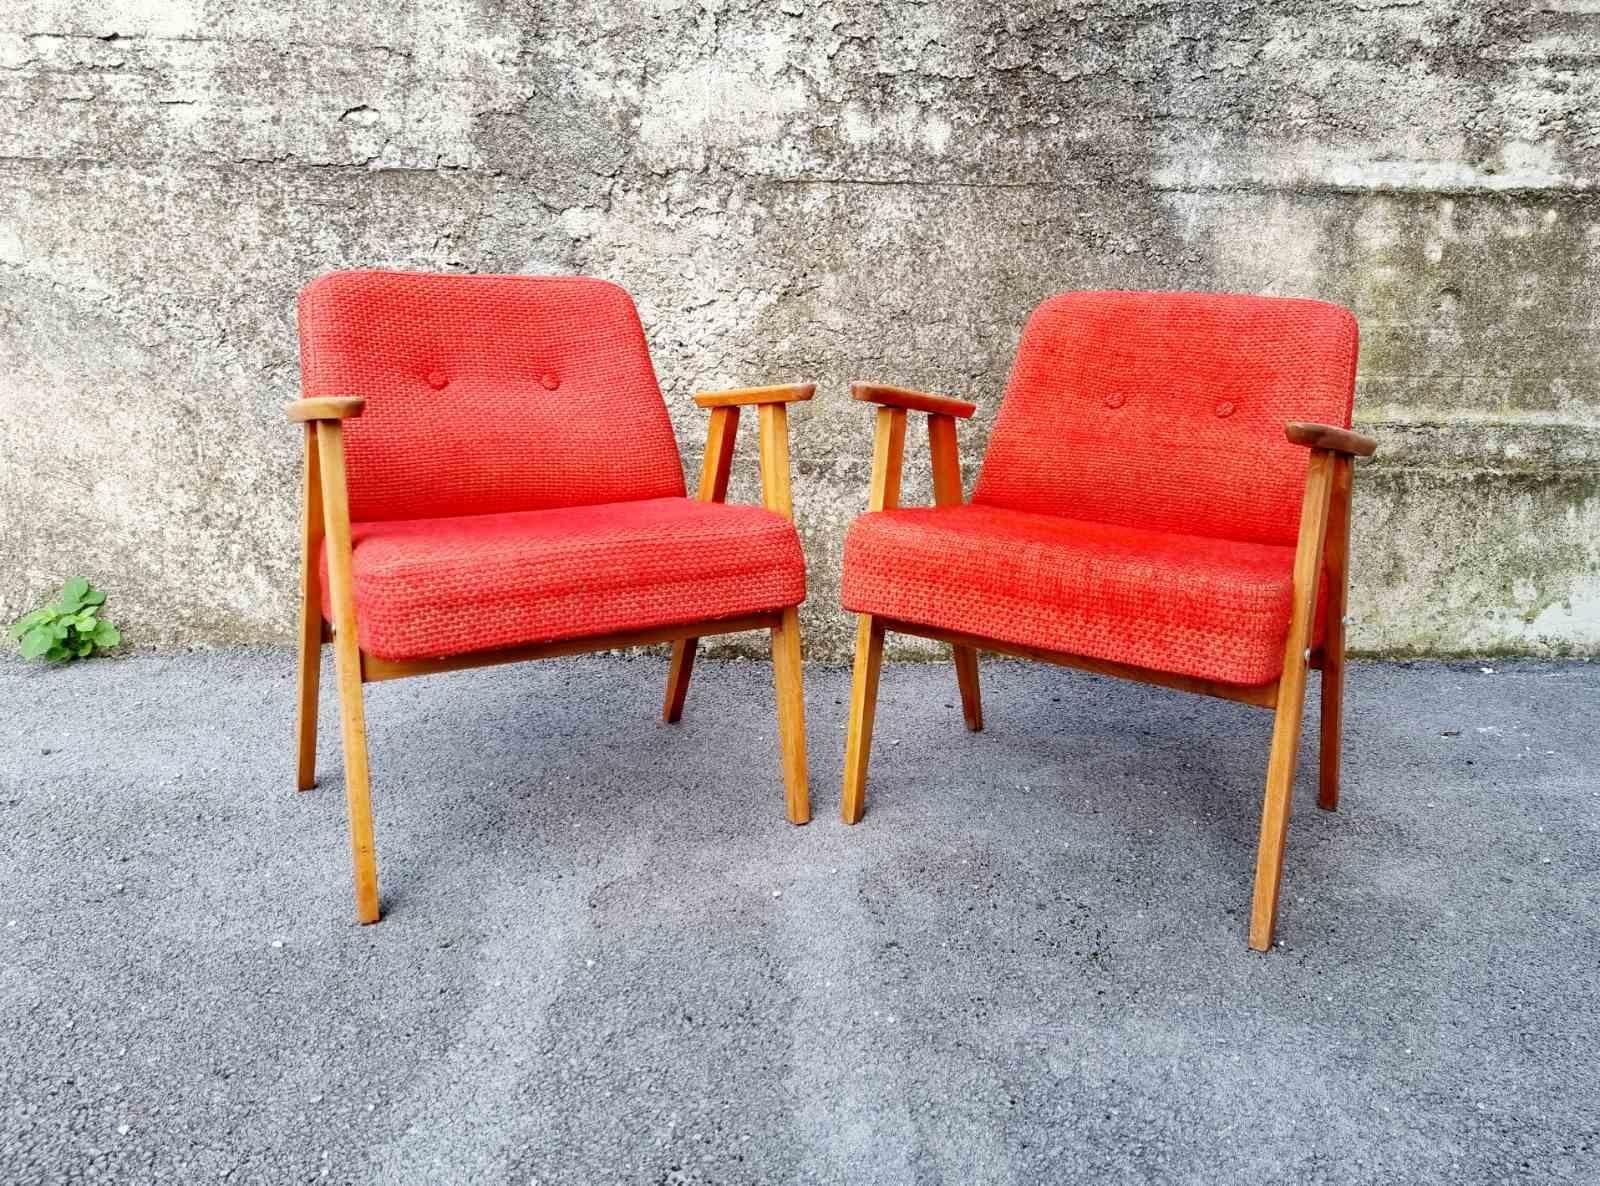 Pair of Midcentury Polish Armchairs, Model 366, Design by Jozef Chierowski 60s For Sale 3